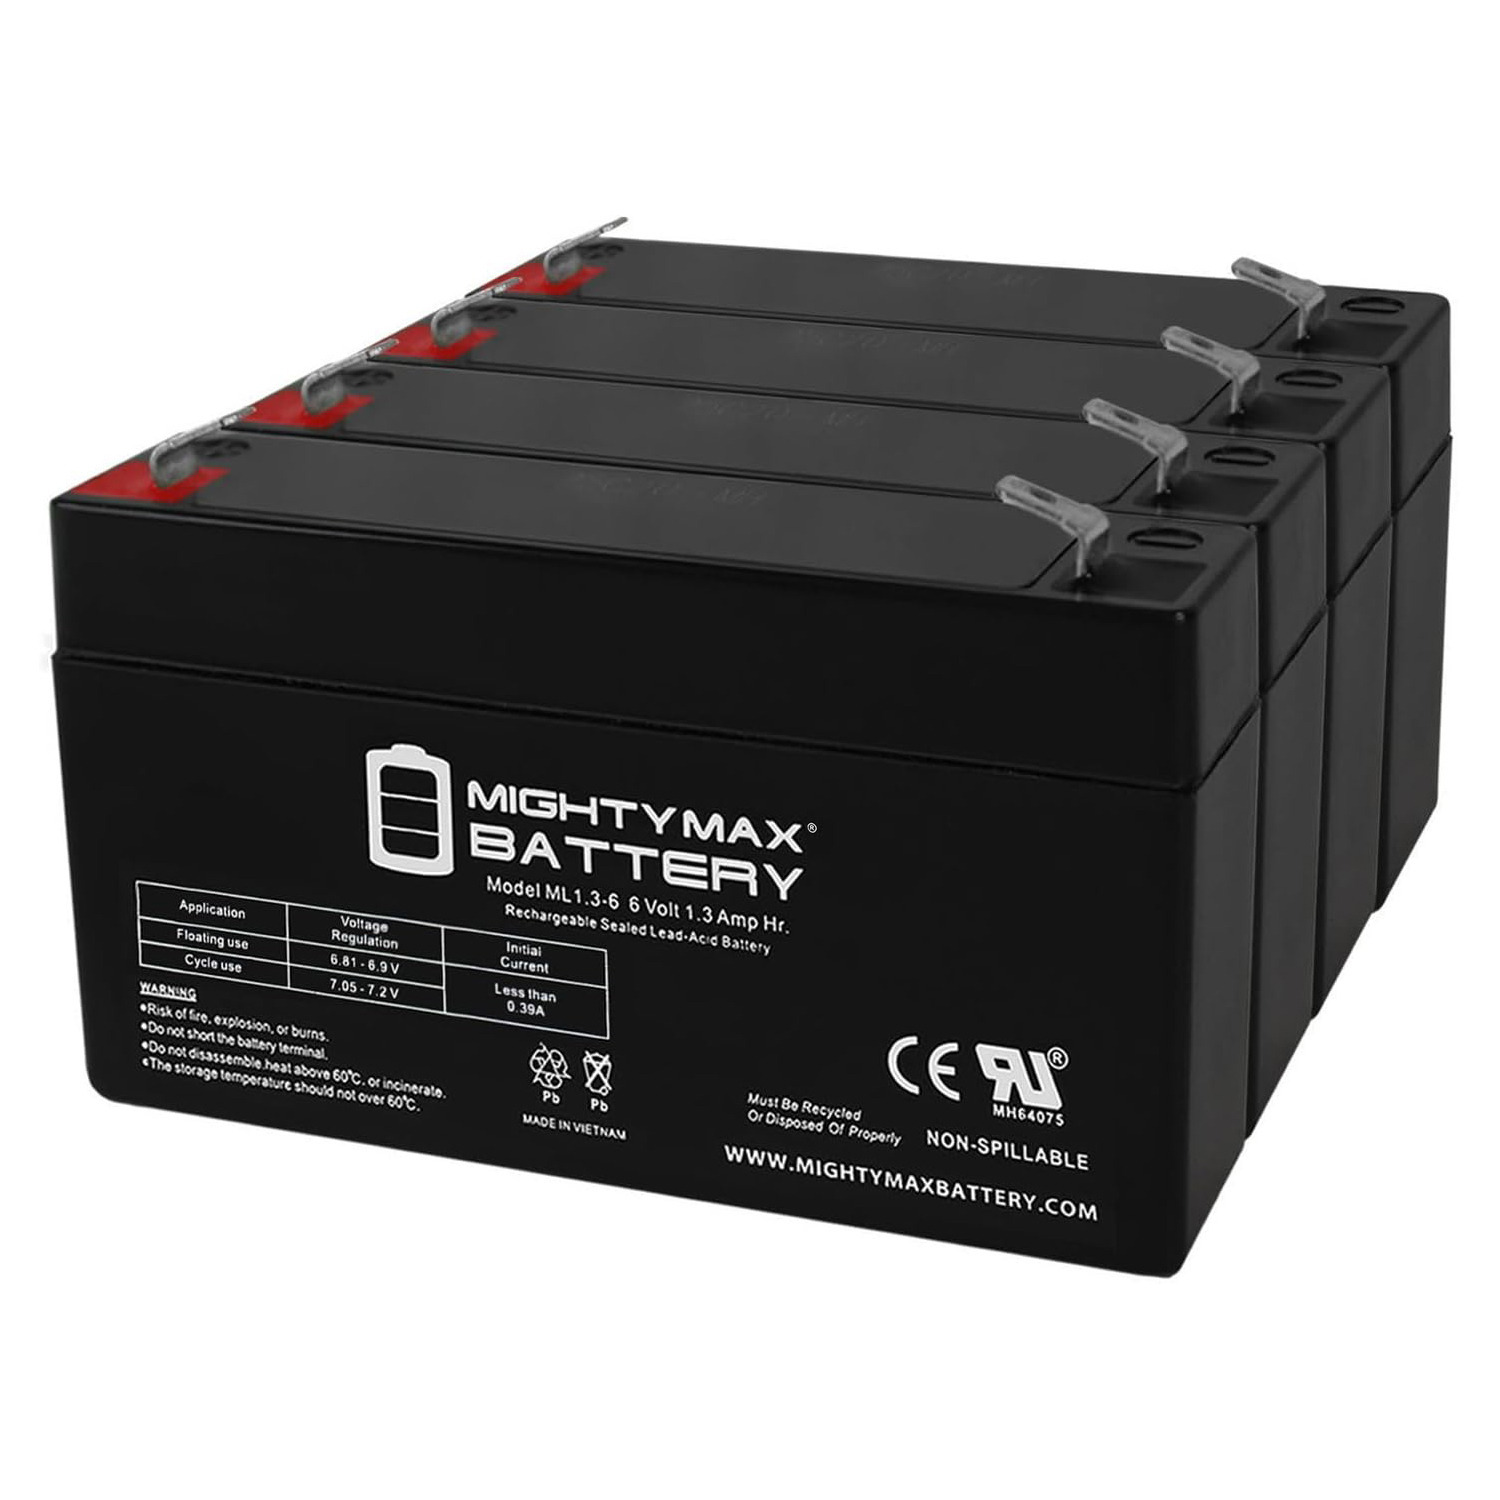 6V 1.3Ah SLA Replacement Battery for Eci Power BLHFM6_1.2-2 - 4 Pack